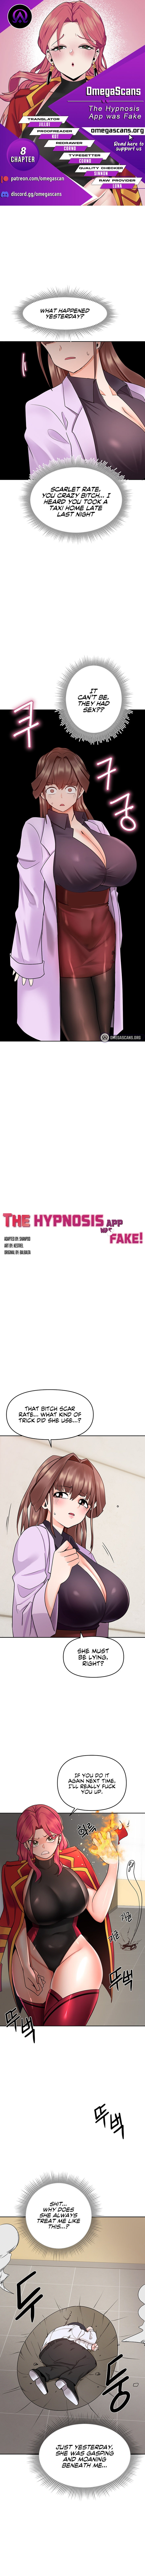 The Hypnosis App was Fake - Chapter 8 Page 1